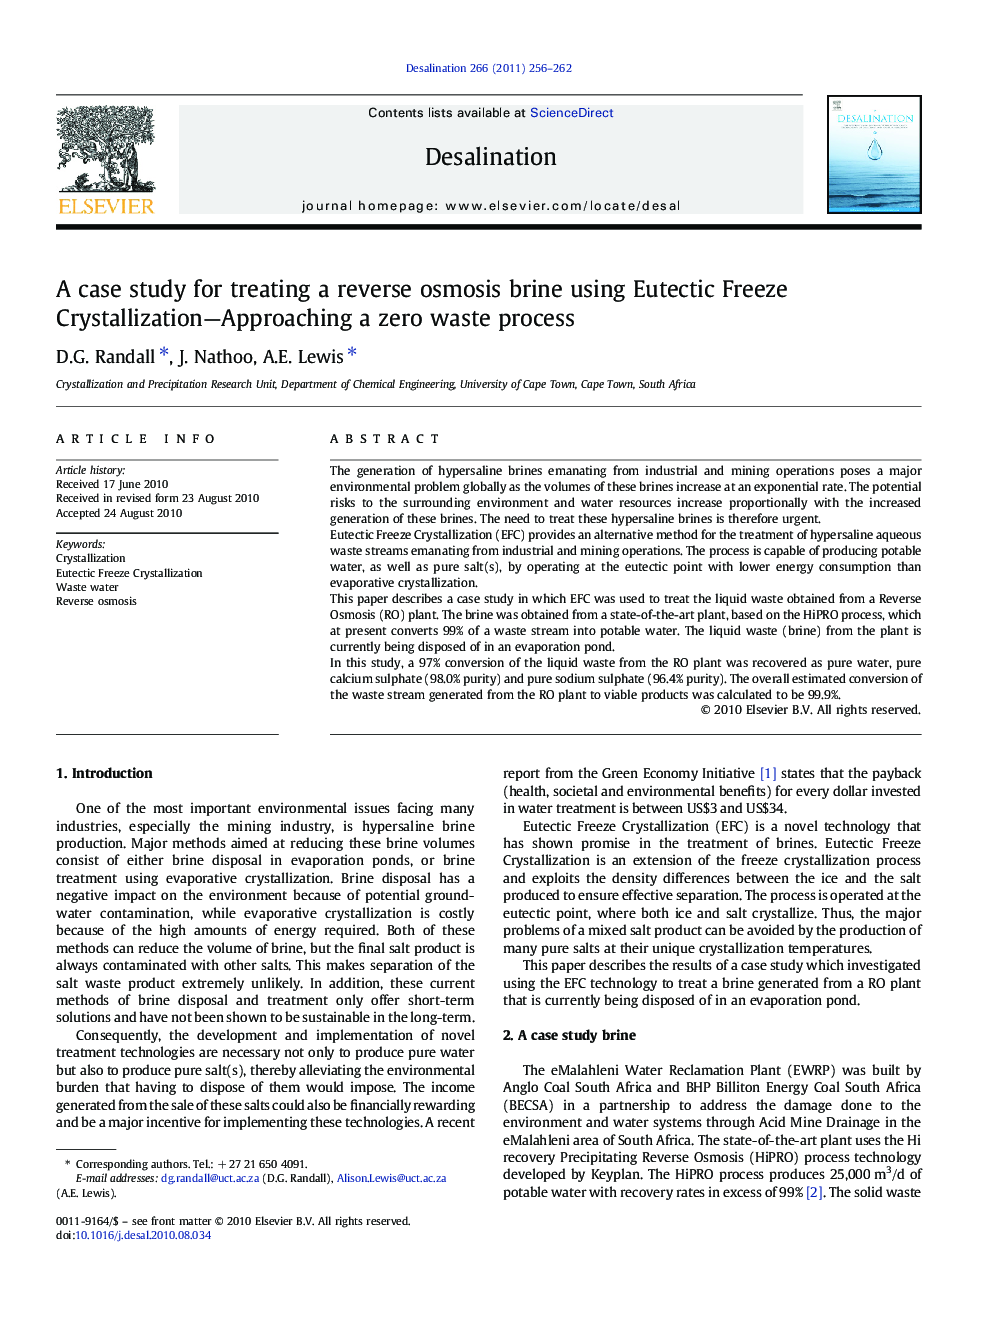 A case study for treating a reverse osmosis brine using Eutectic Freeze Crystallization—Approaching a zero waste process